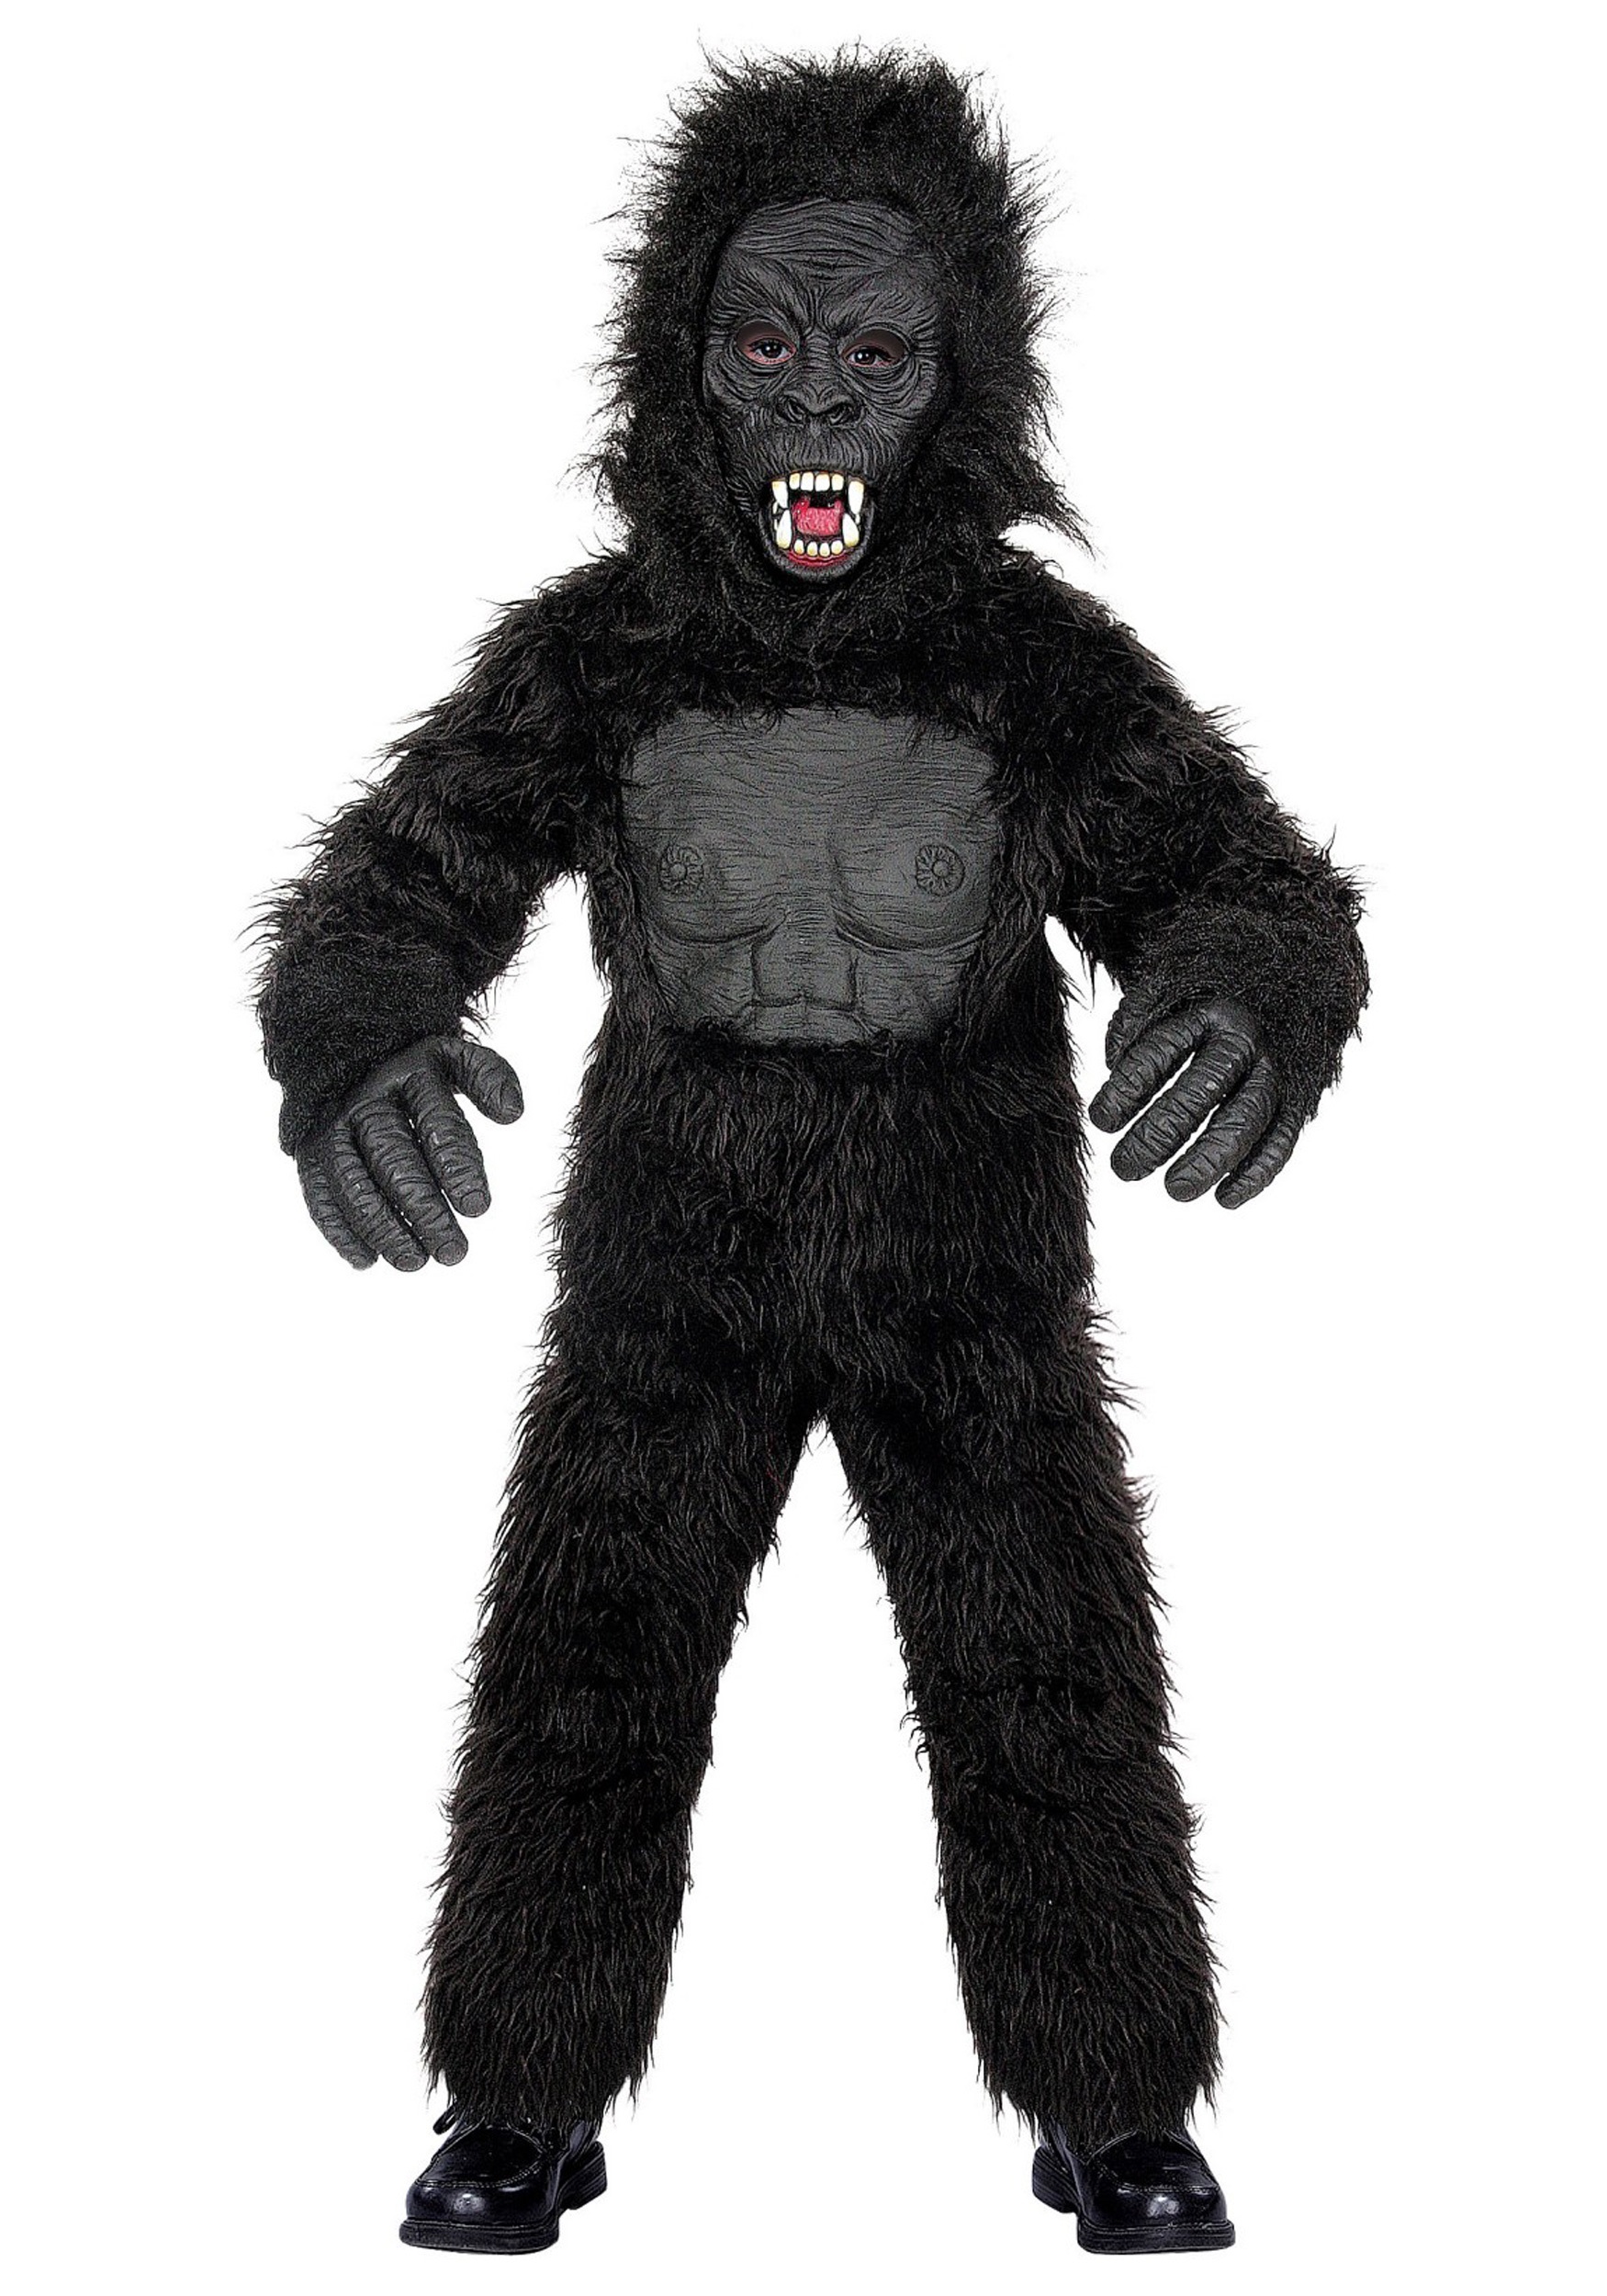 Scary Gorilla Costume for Kids